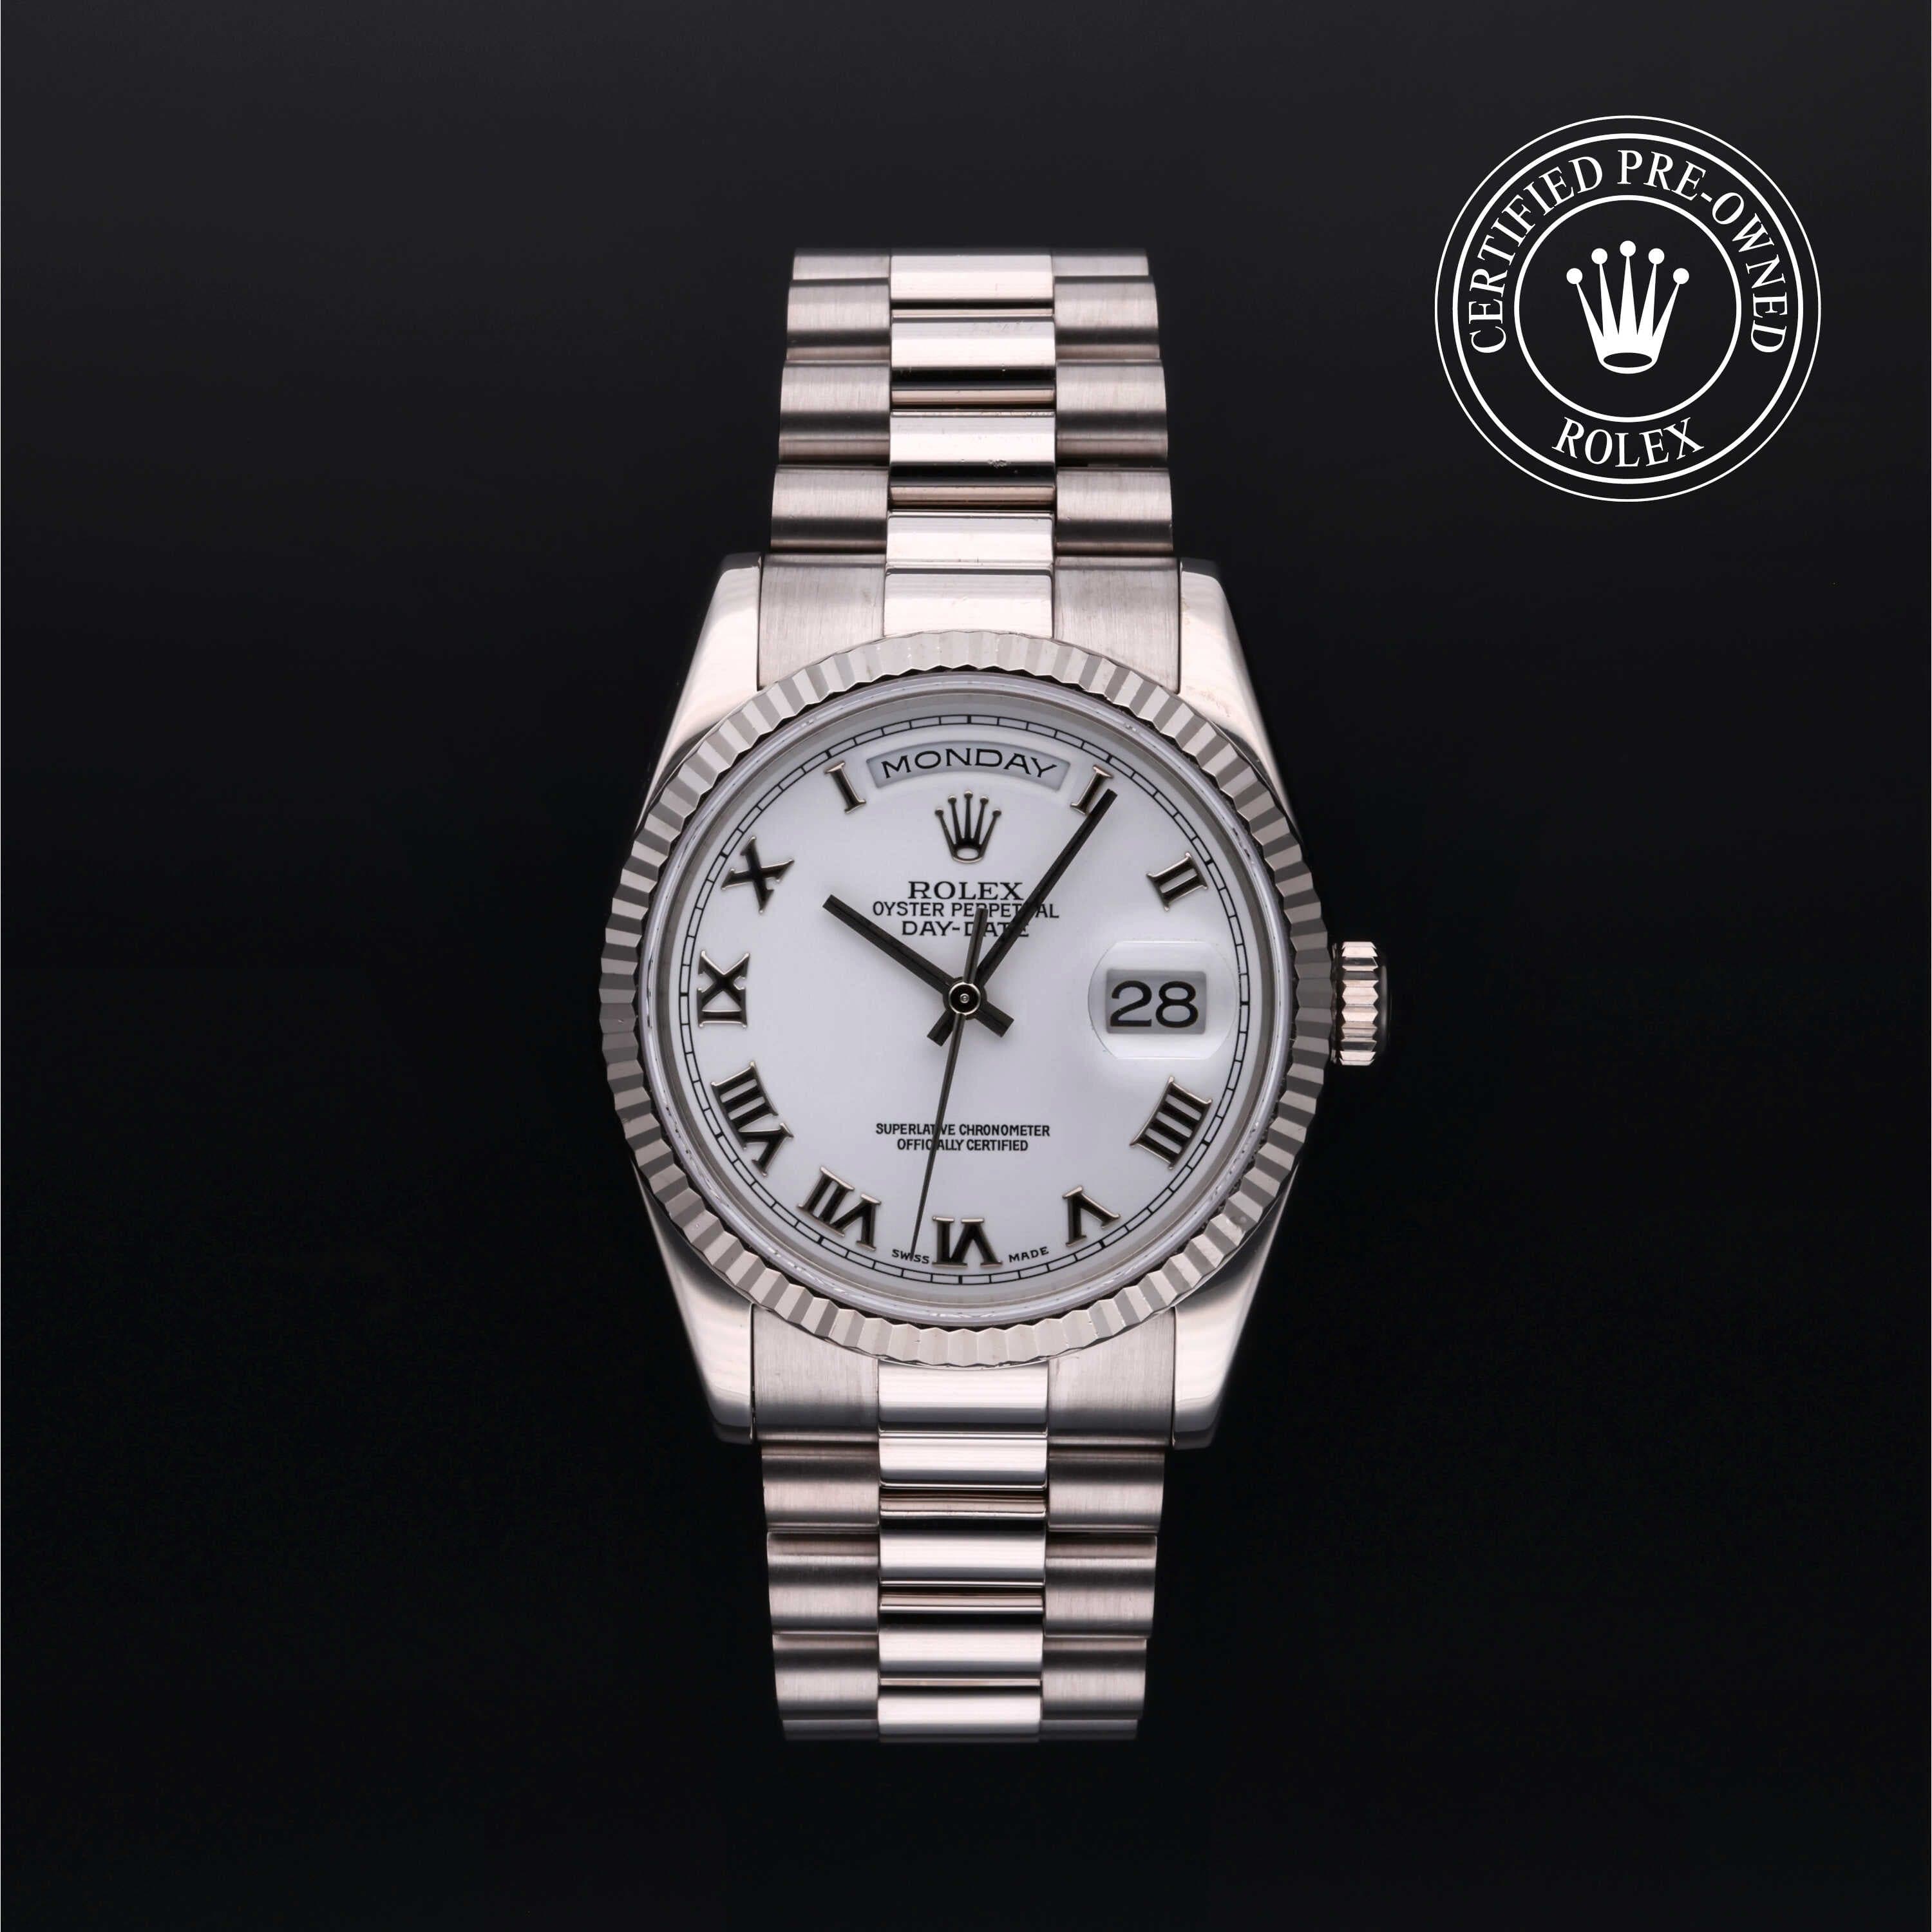 Rolex Certified Pre-Owned Day-Date in President, 36 mm, 18k white gold watch